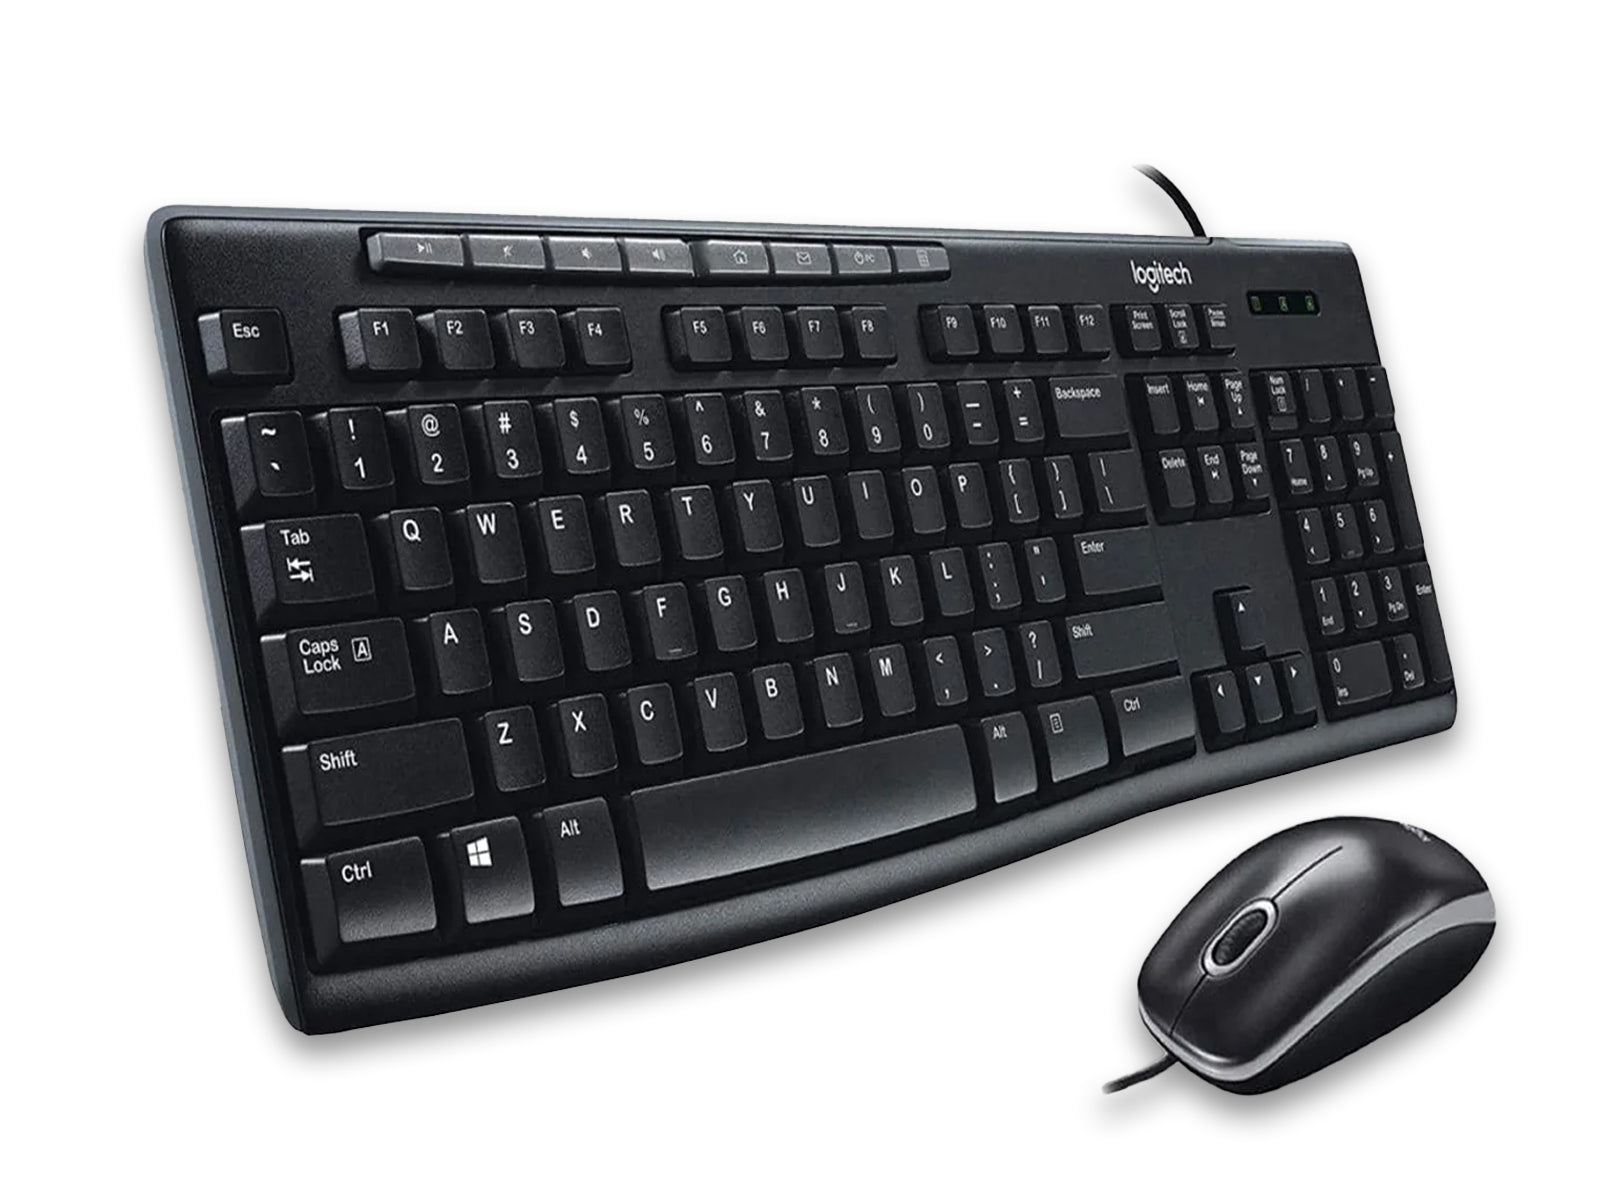 Image shows a left side veiw of the Logitech MK200 Combo Keyboard & Mouse on a white background